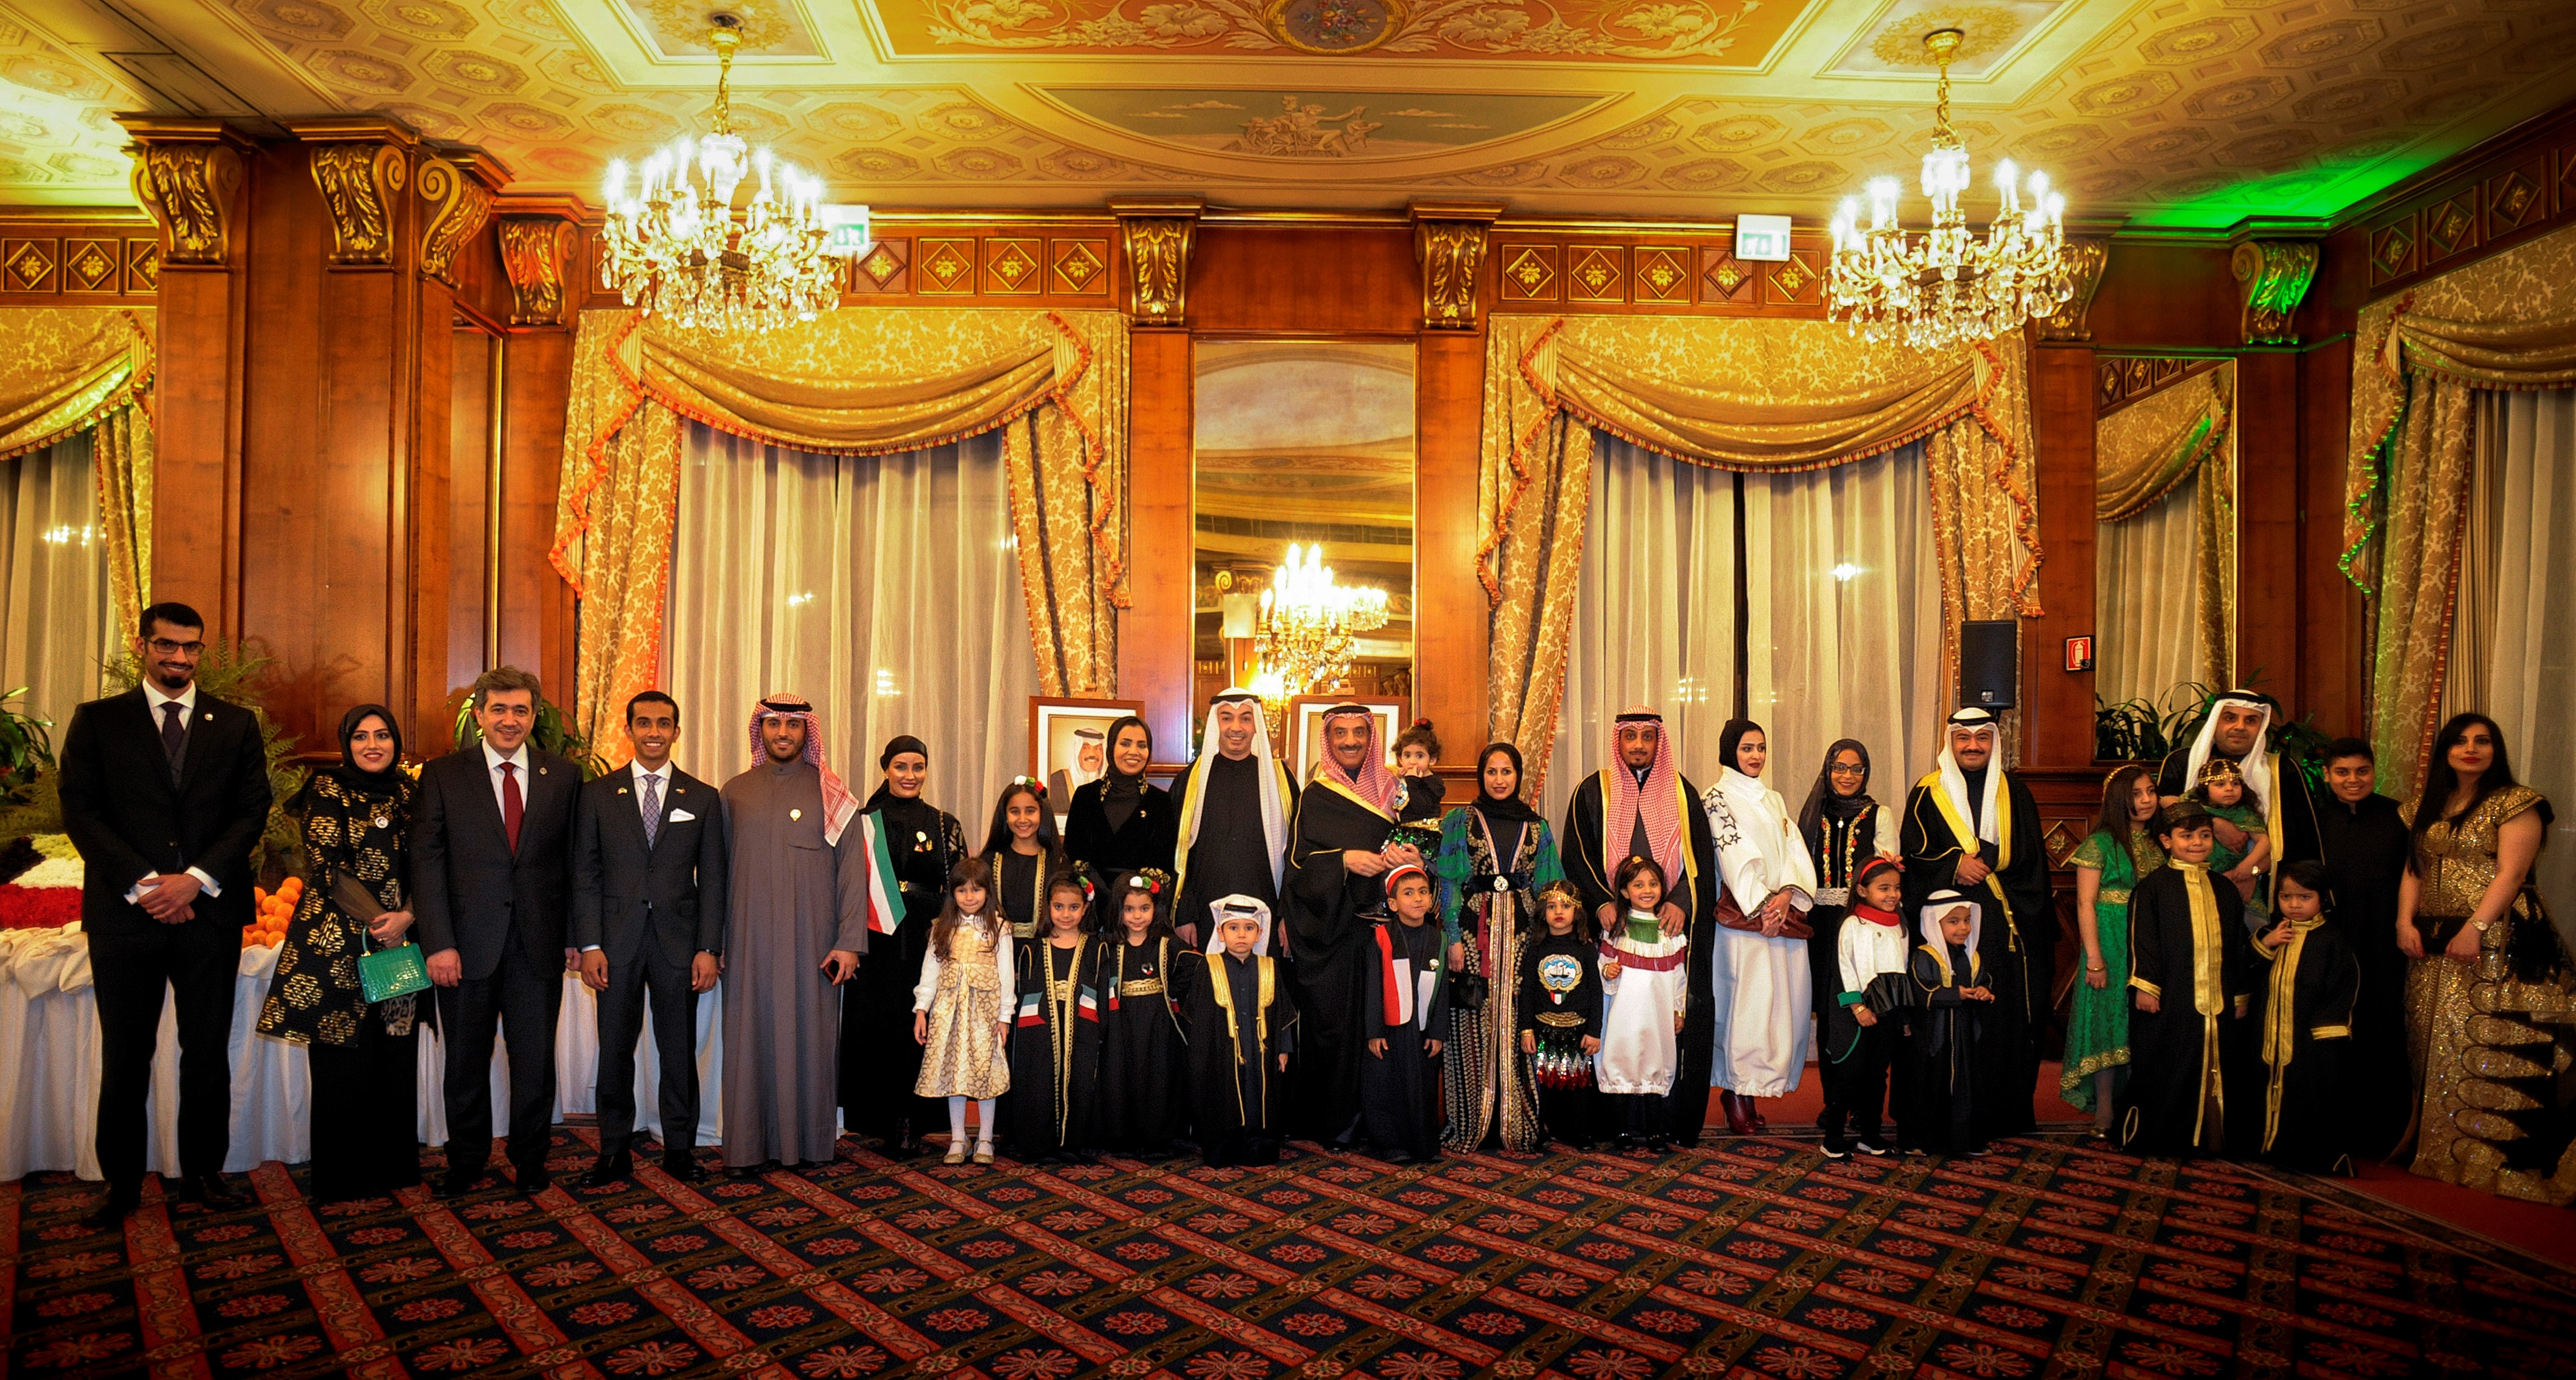 In Italy, Kuwait's Consulate in Milan celebrated the country's national days